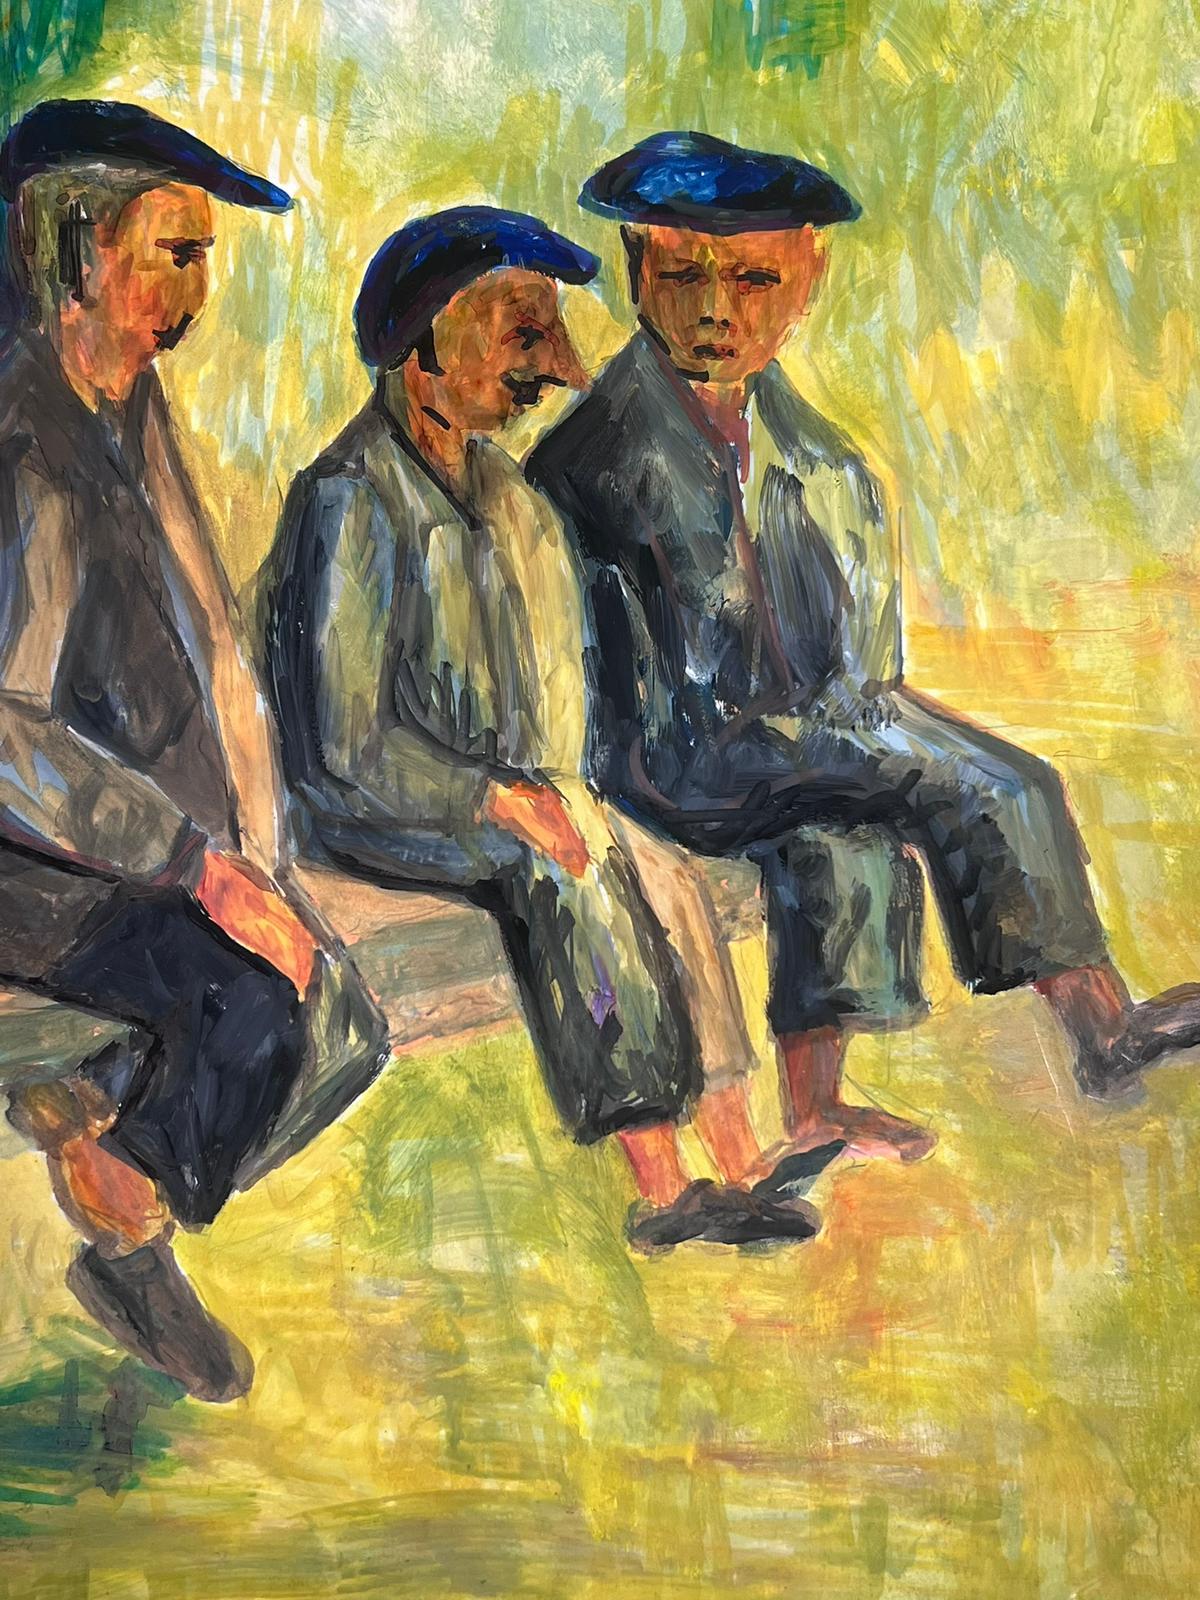 Three Old Friends
by Bernard Labbe (French mid 20th century) 
original gouache on artist paper
size: 18.5 x 16.5 inches
condition: very good and ready to be enjoyed

provenance: the artists atelier/ studio, France (stamped verso)